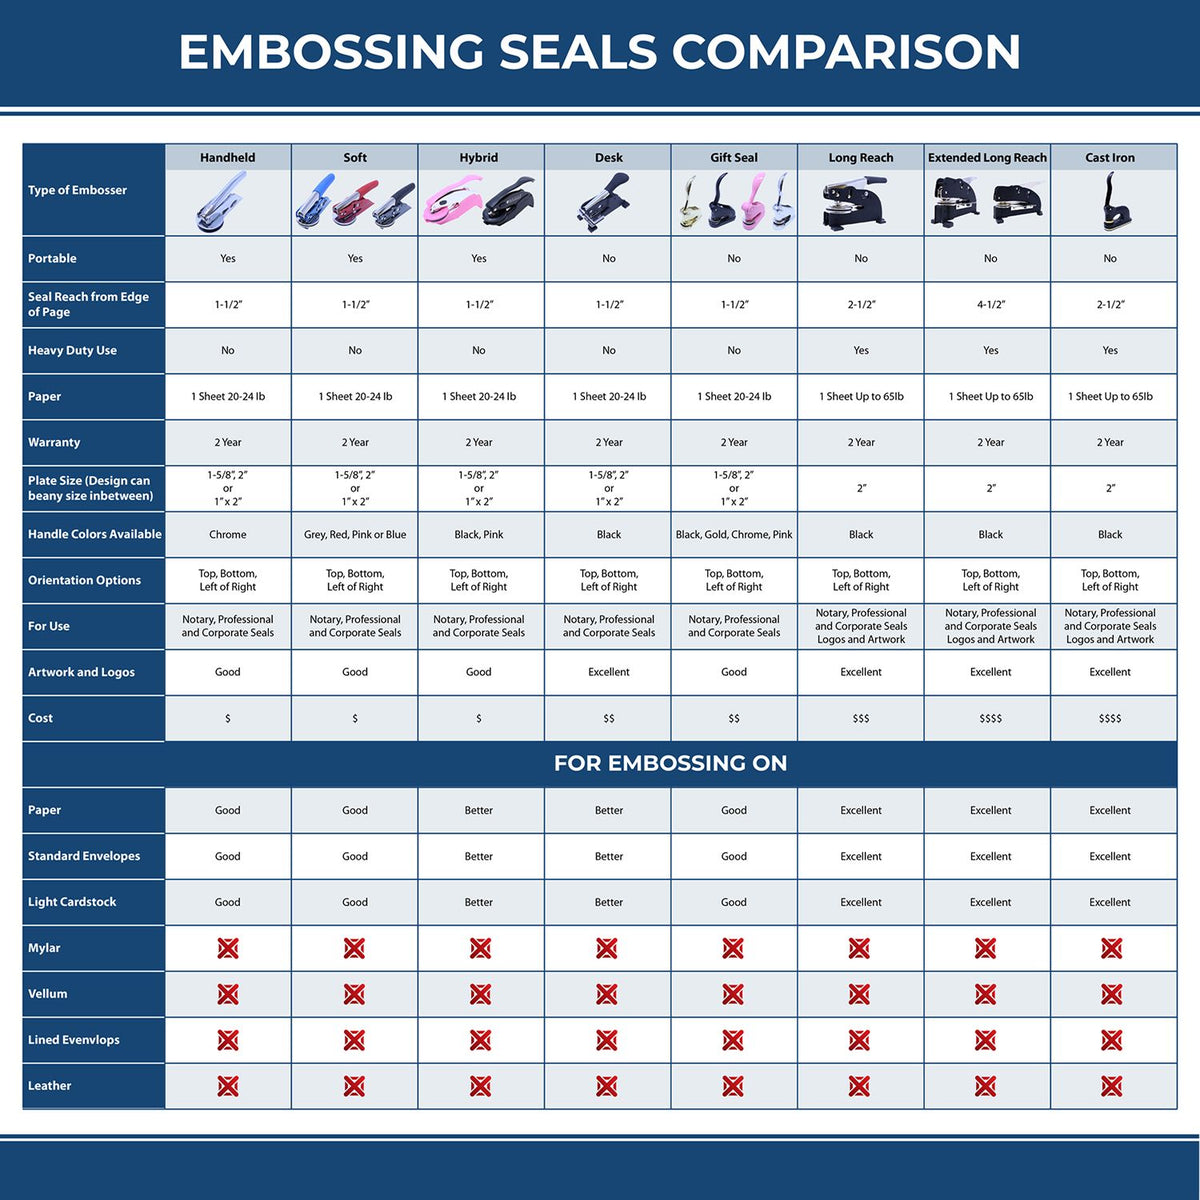 A comparison chart for the different types of mount models available for the Handheld Alabama Land Surveyor Seal.